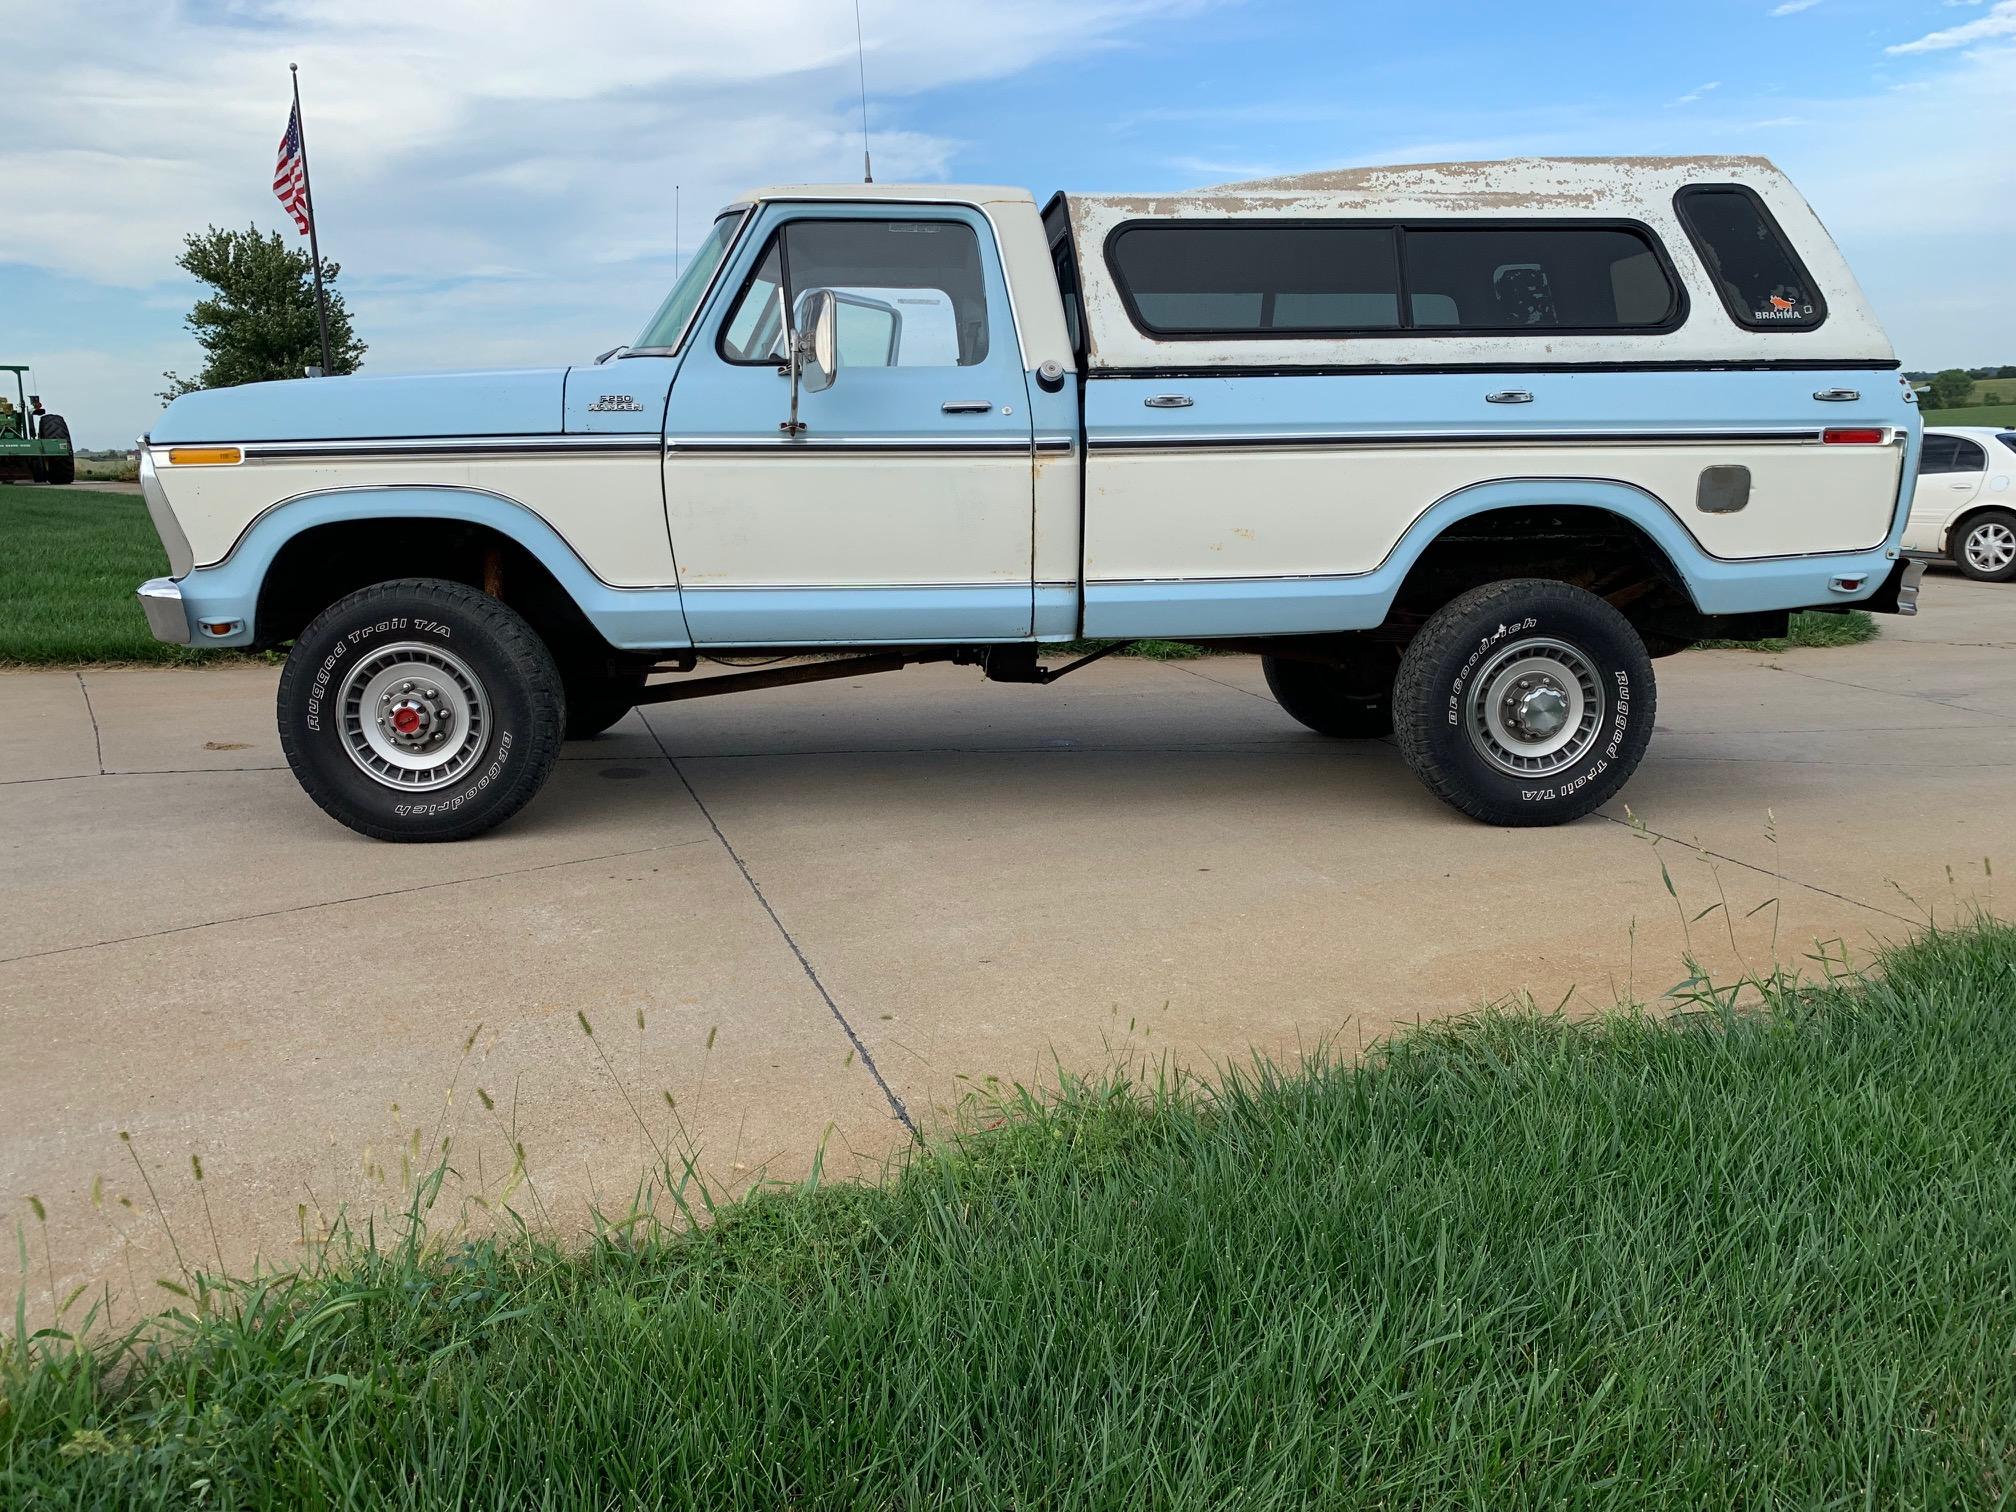 1977 Ford Model F-250 4x4 Highboy Pickup with Topper, VIN# F26SR028134, 55,618 Miles, 460 Cubic Inch